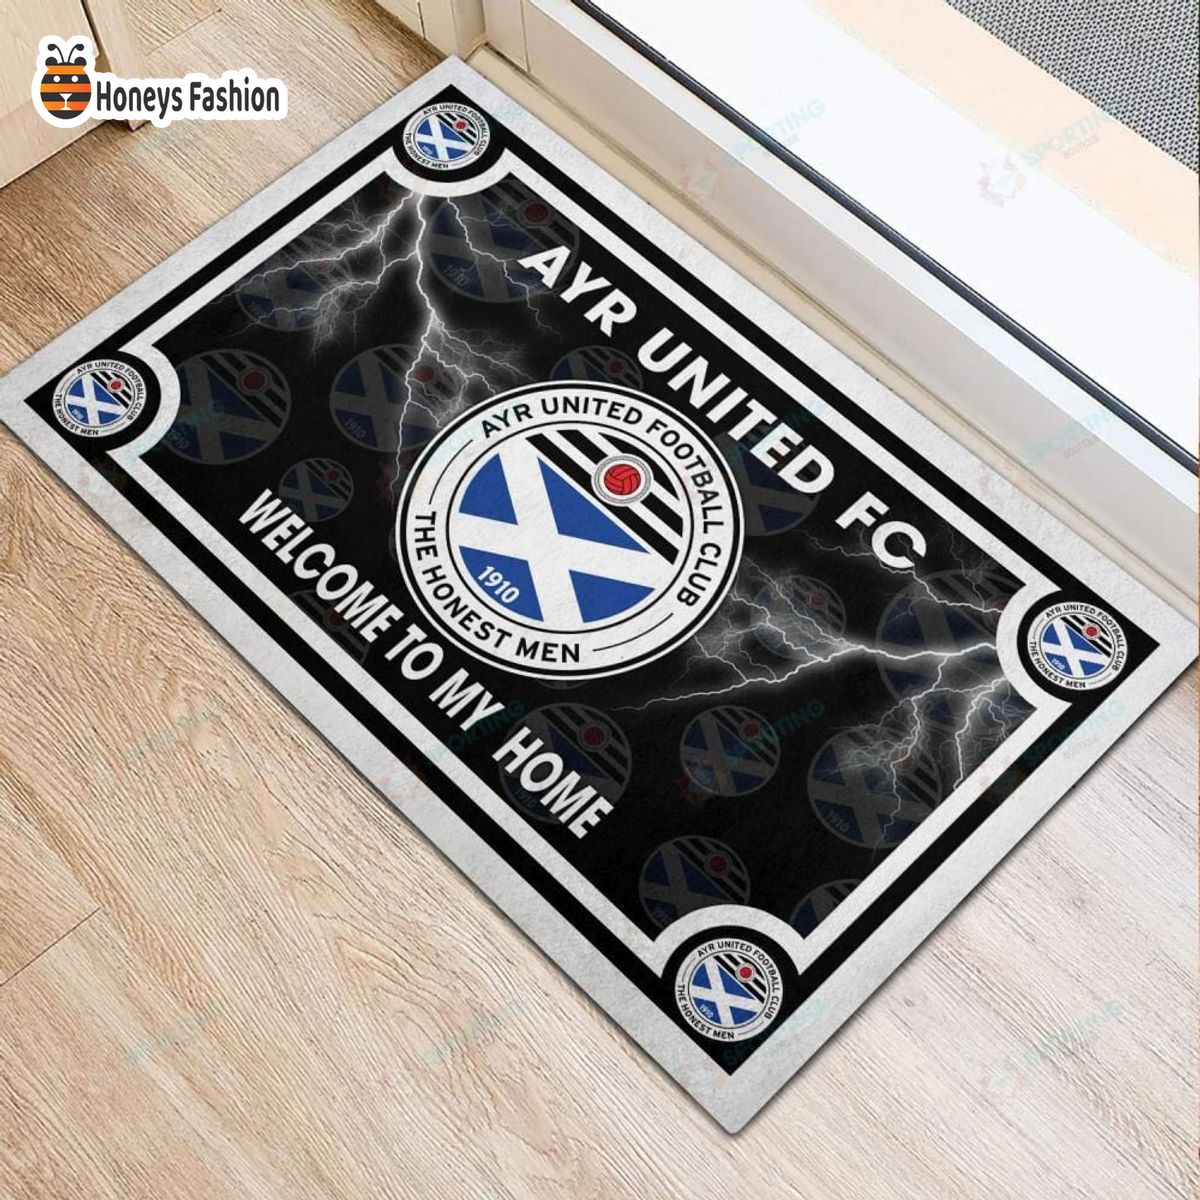 Ayr United F.C. welcome to my home doormat